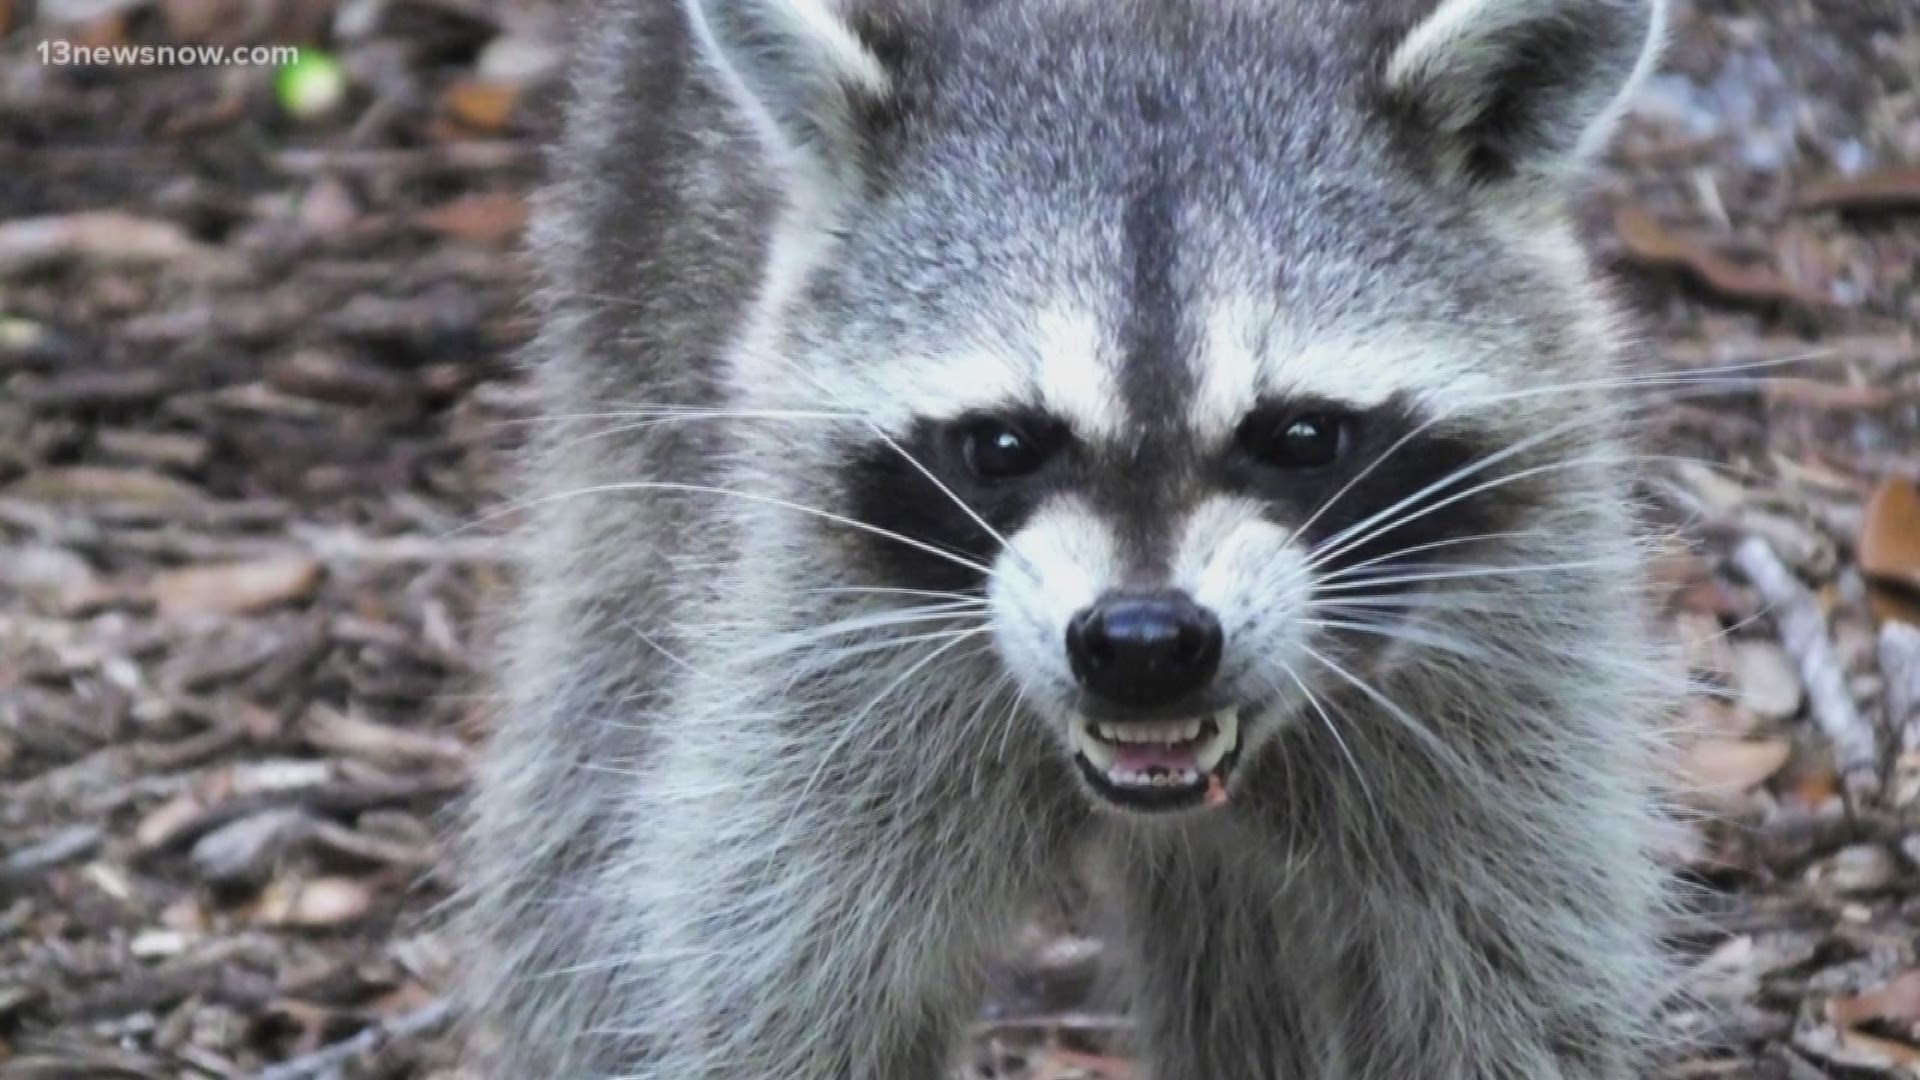 The raccoon was found in a backyard in the 100 block of Waterfront Drive.